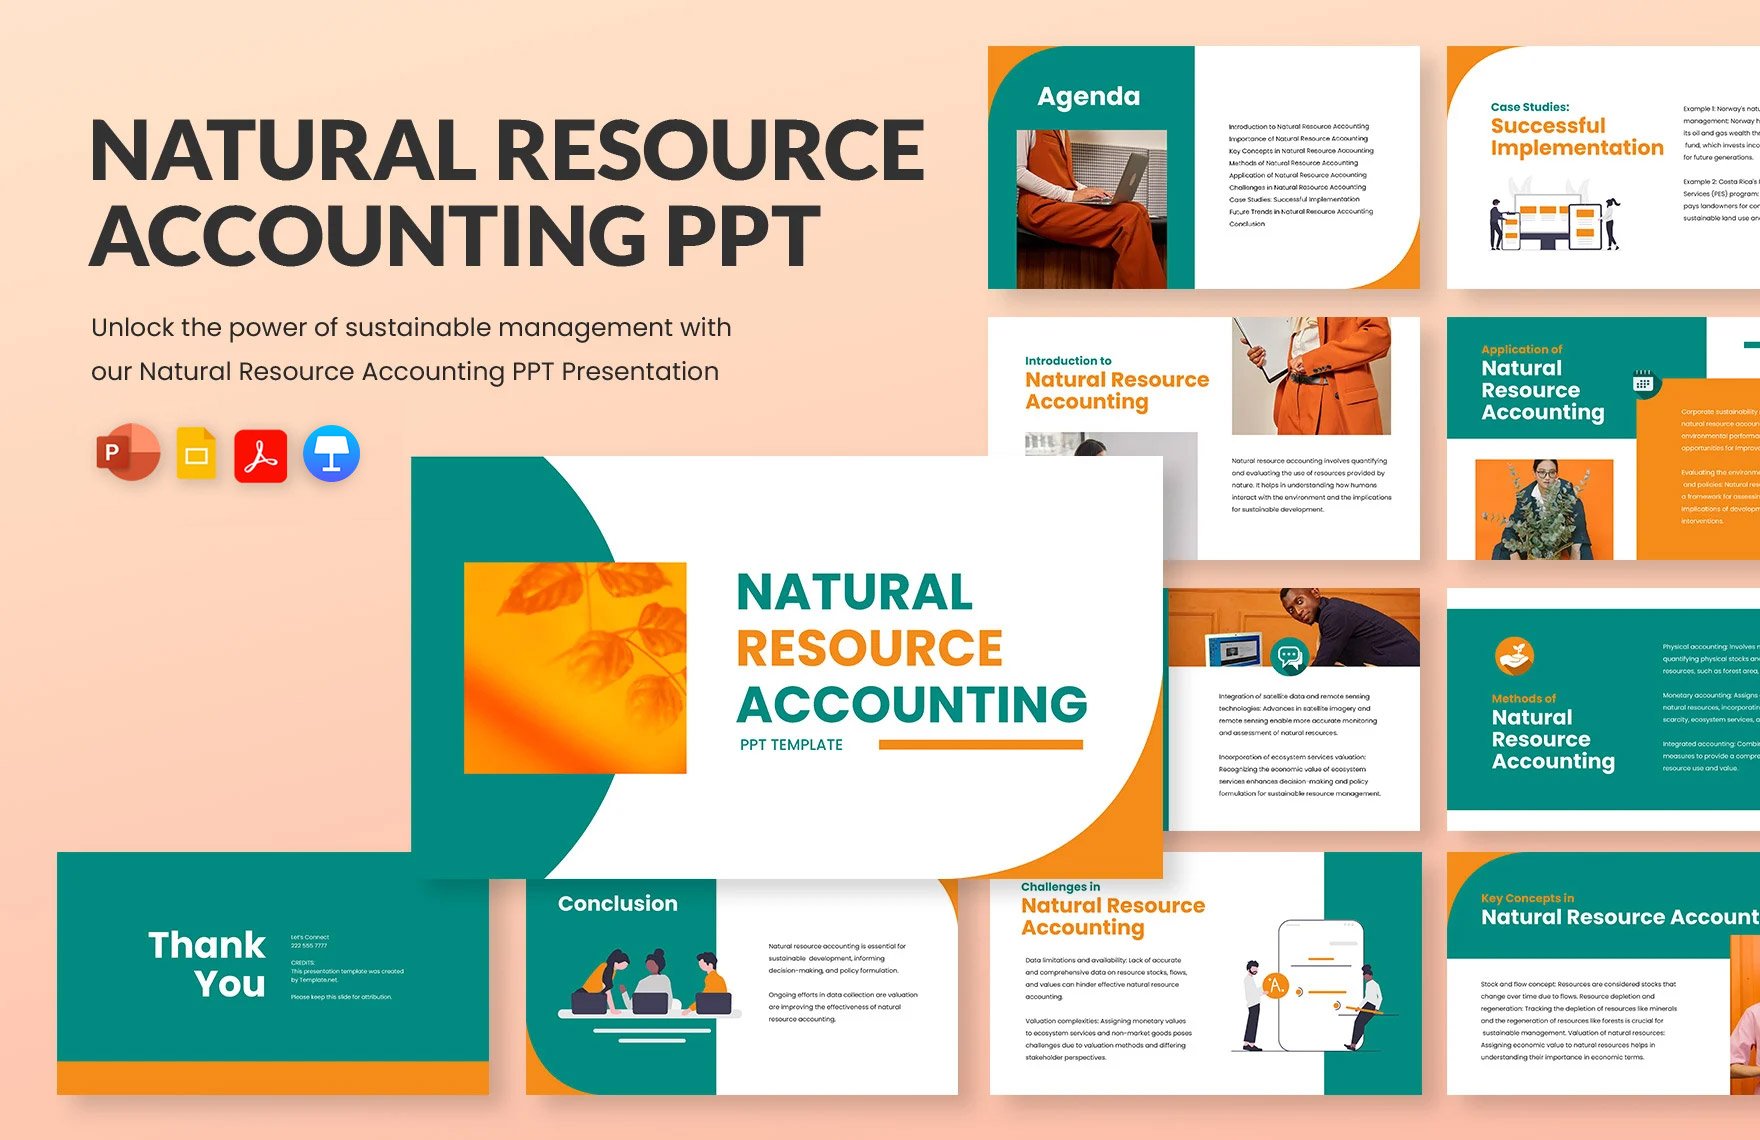 Natural Resource Accounting PPT Template in PDF, PowerPoint, Google Slides, Apple Keynote